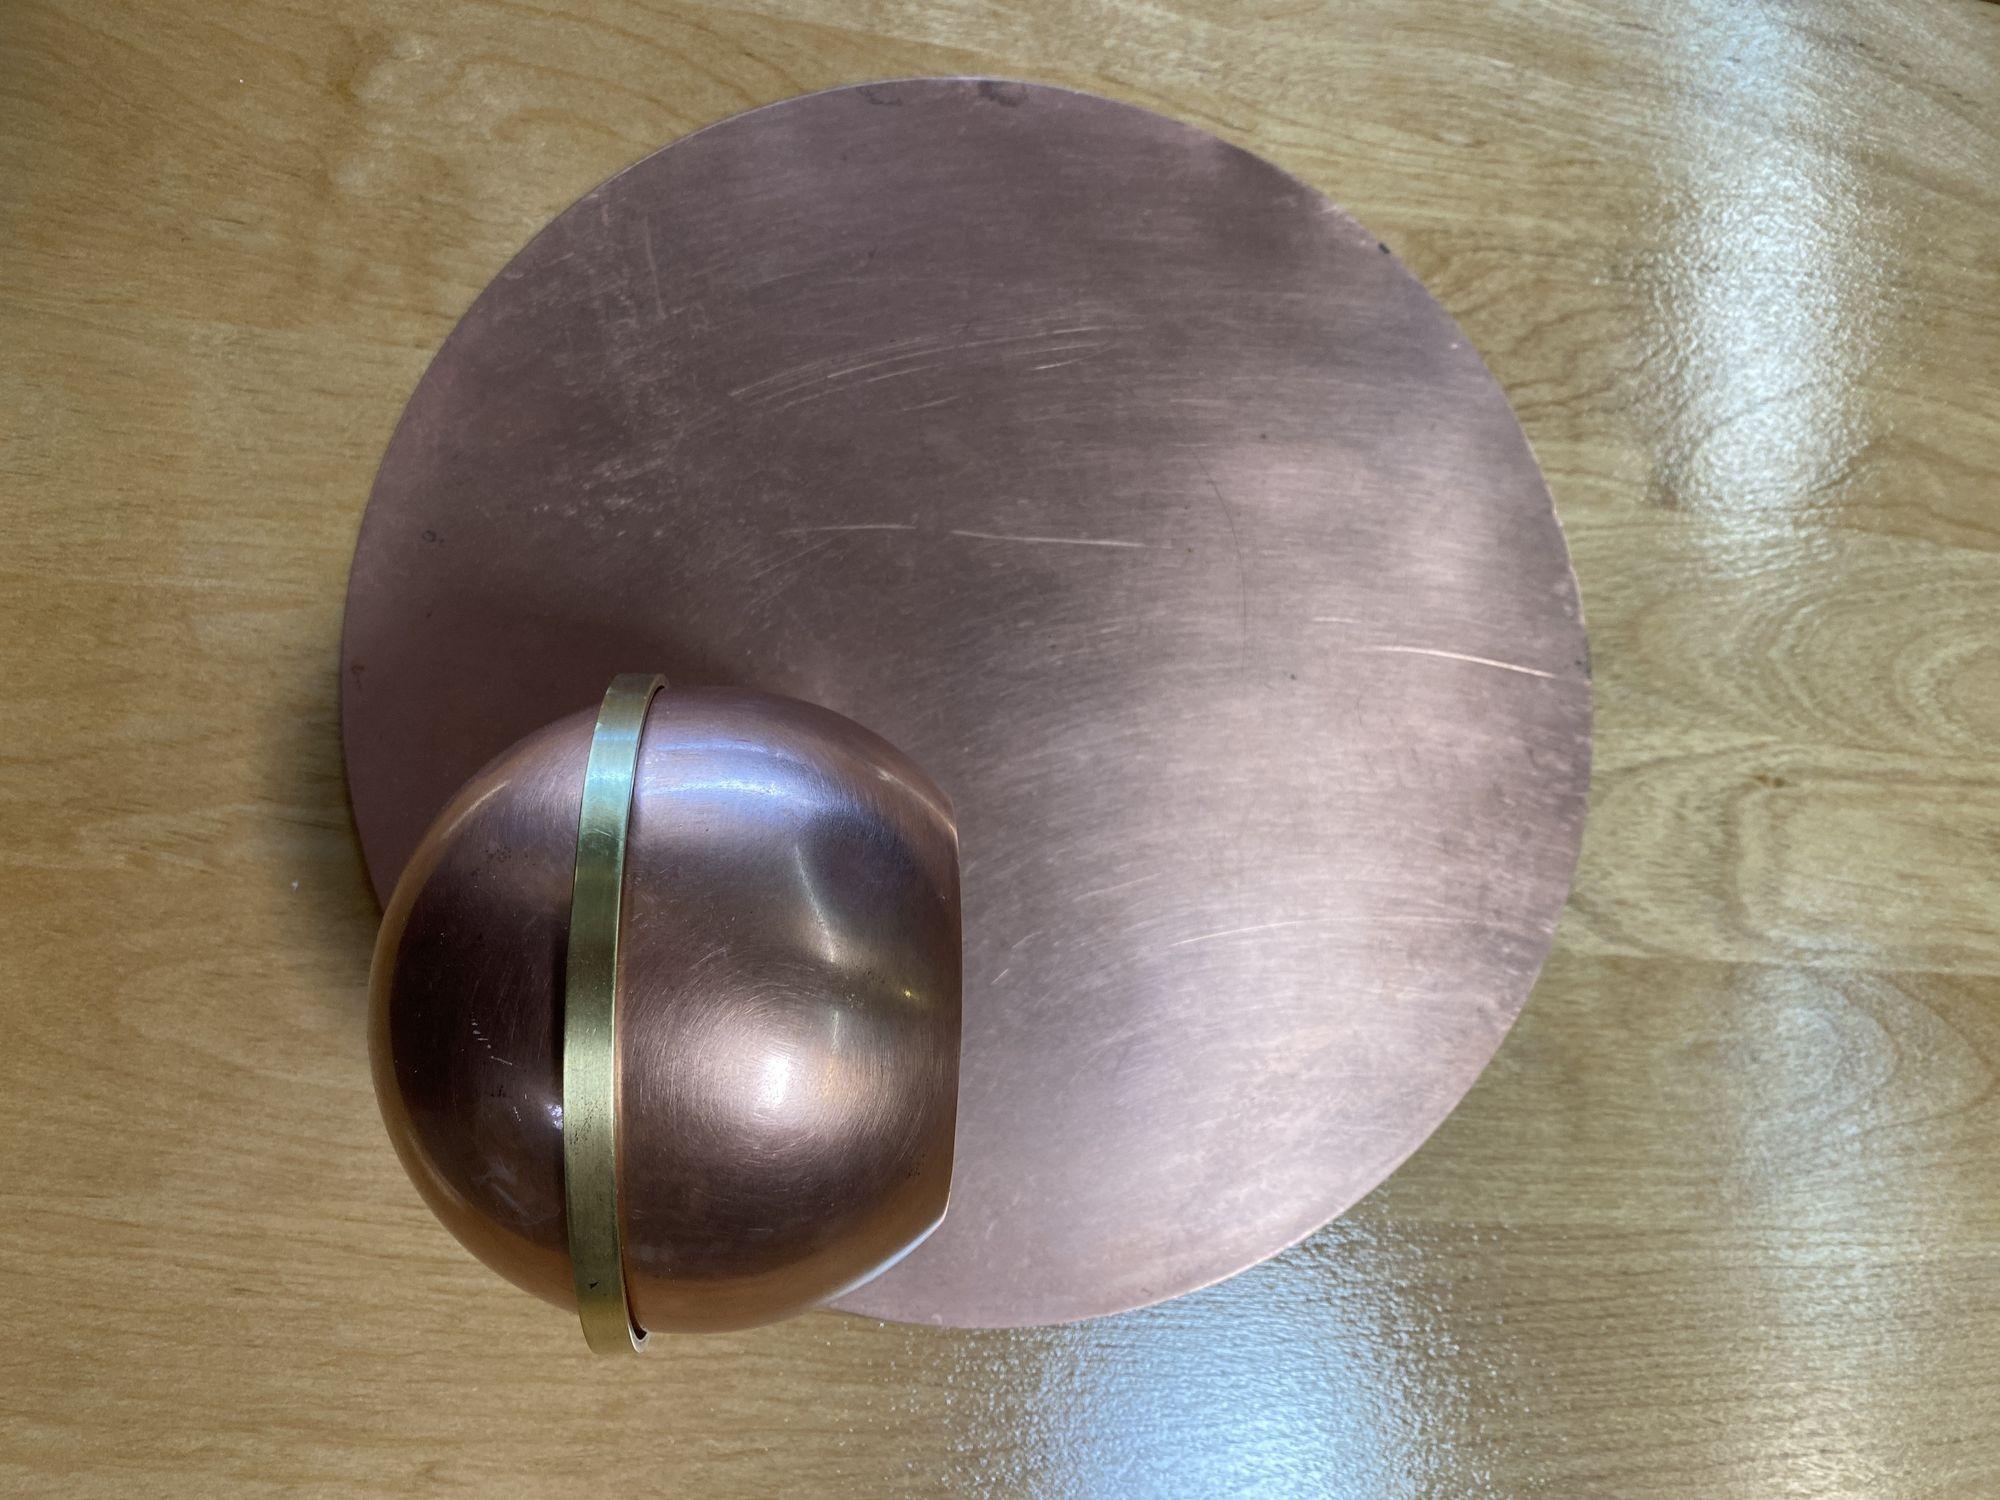 A unique pair of Art Deco wall planters crafted from copper and brass. This exceptional set includes two wall platters, each mirroring the other, presenting a round copper backplate, a brass ring-shaped holder, and a removable sphere-shaped